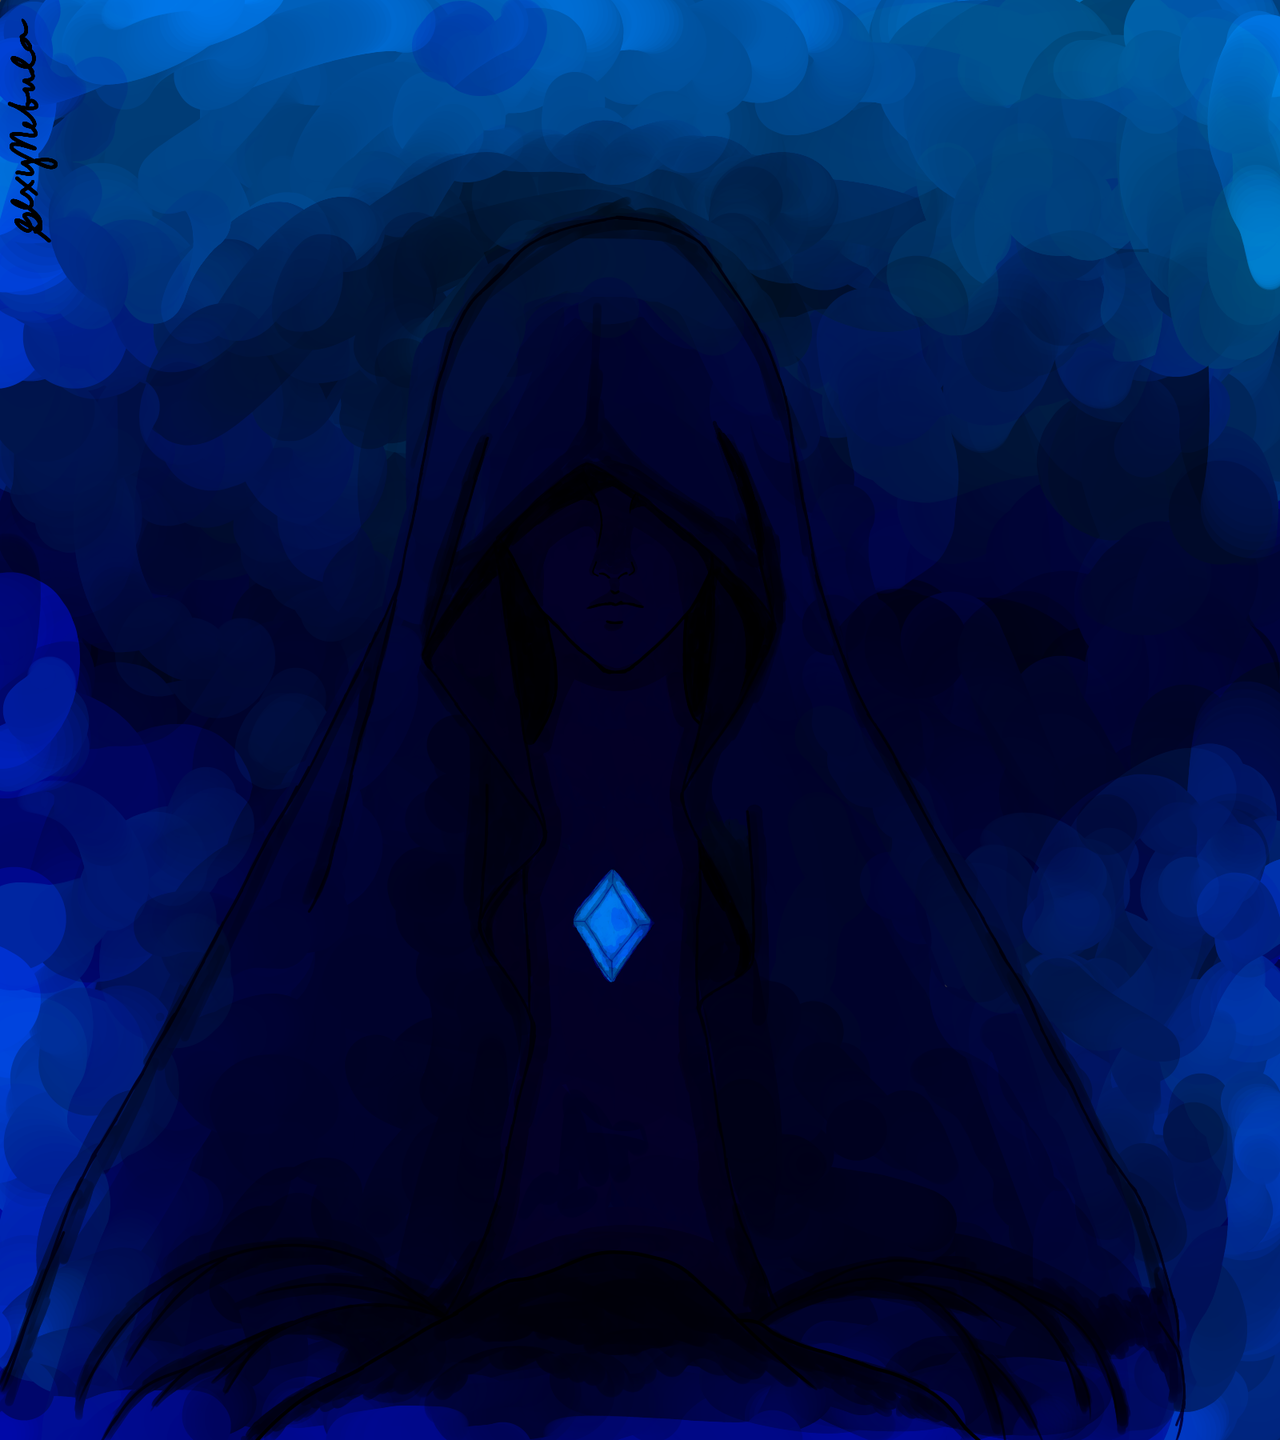 I finally finished my digital art of Blue Diamond from Steven Universe. I apologize for some noticeable mistakes since I’m still learning and it’s been awhile since I’ve played with digital art.